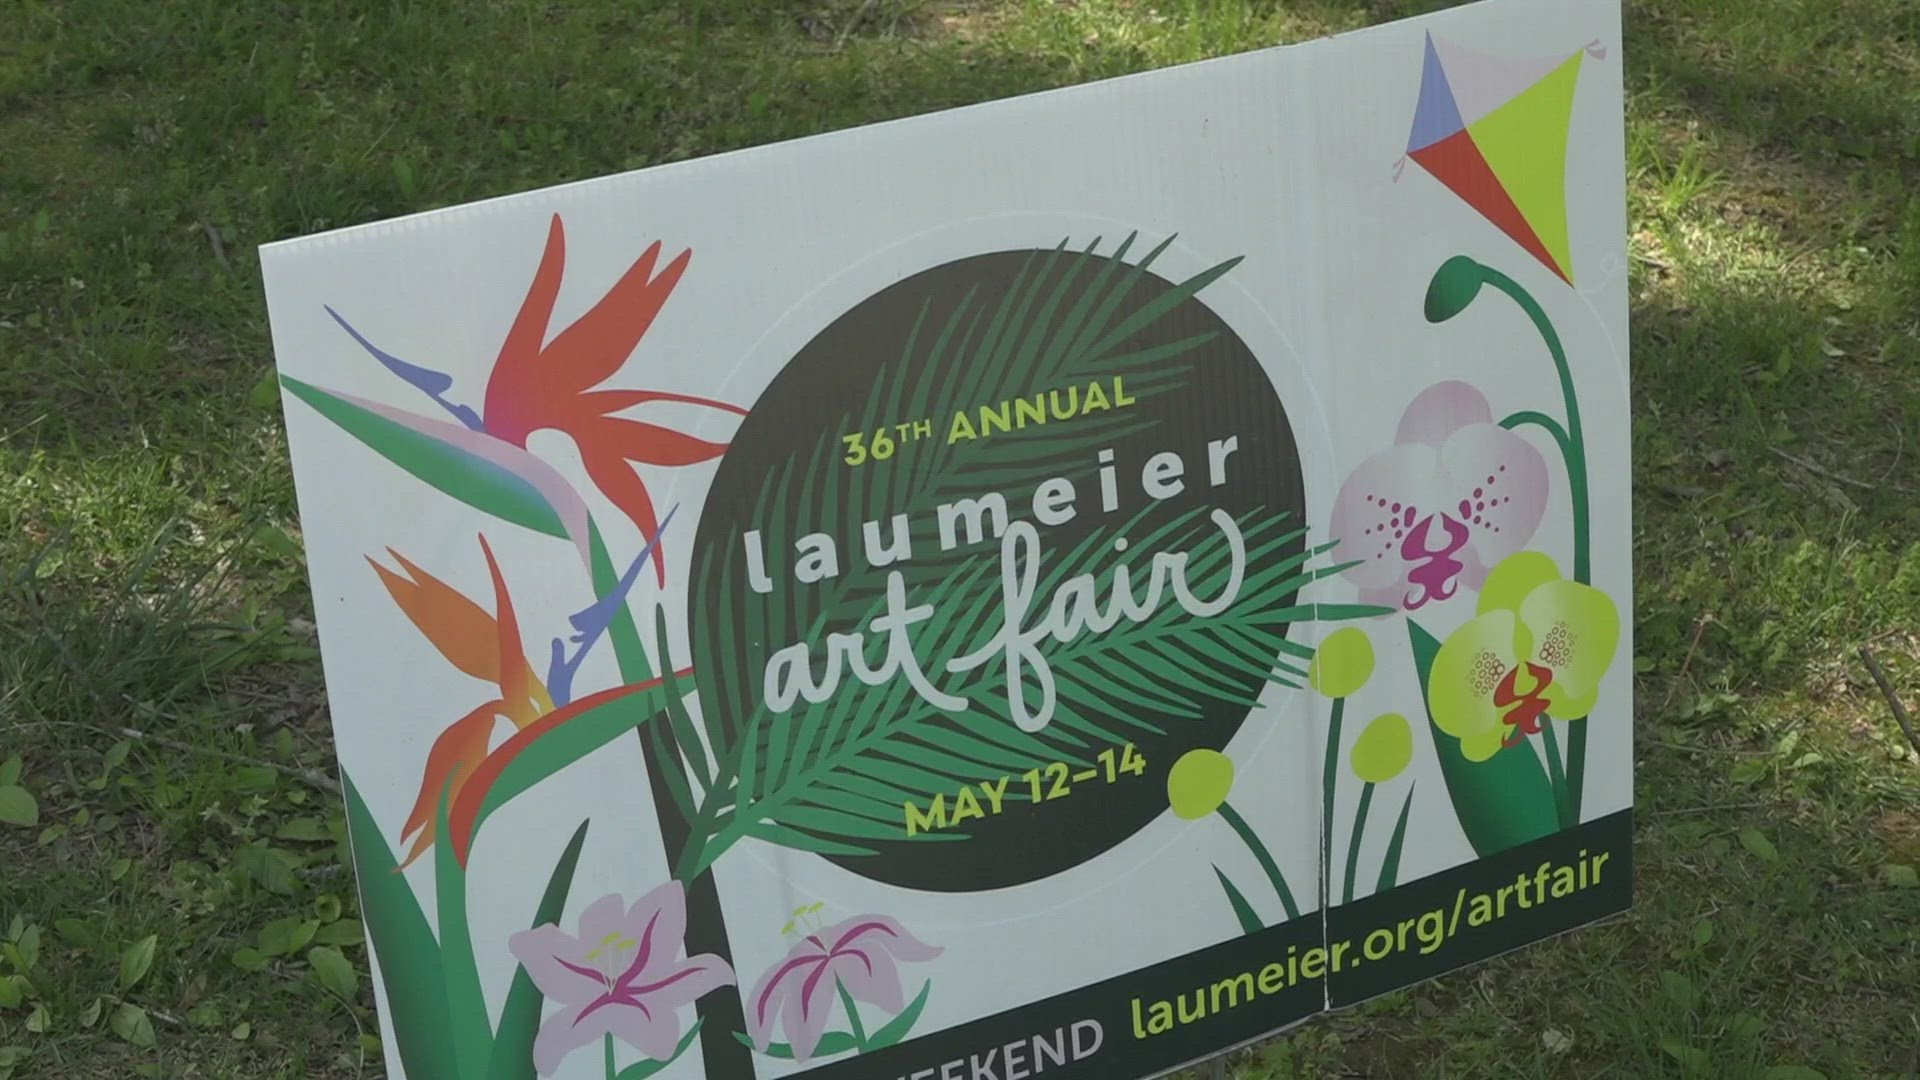 Laumeier Sculpture Park's art fair kicks off at 6 p.m. Friday night and goes all weekend. The fair is an opportunity for the park to fundraise money each year.